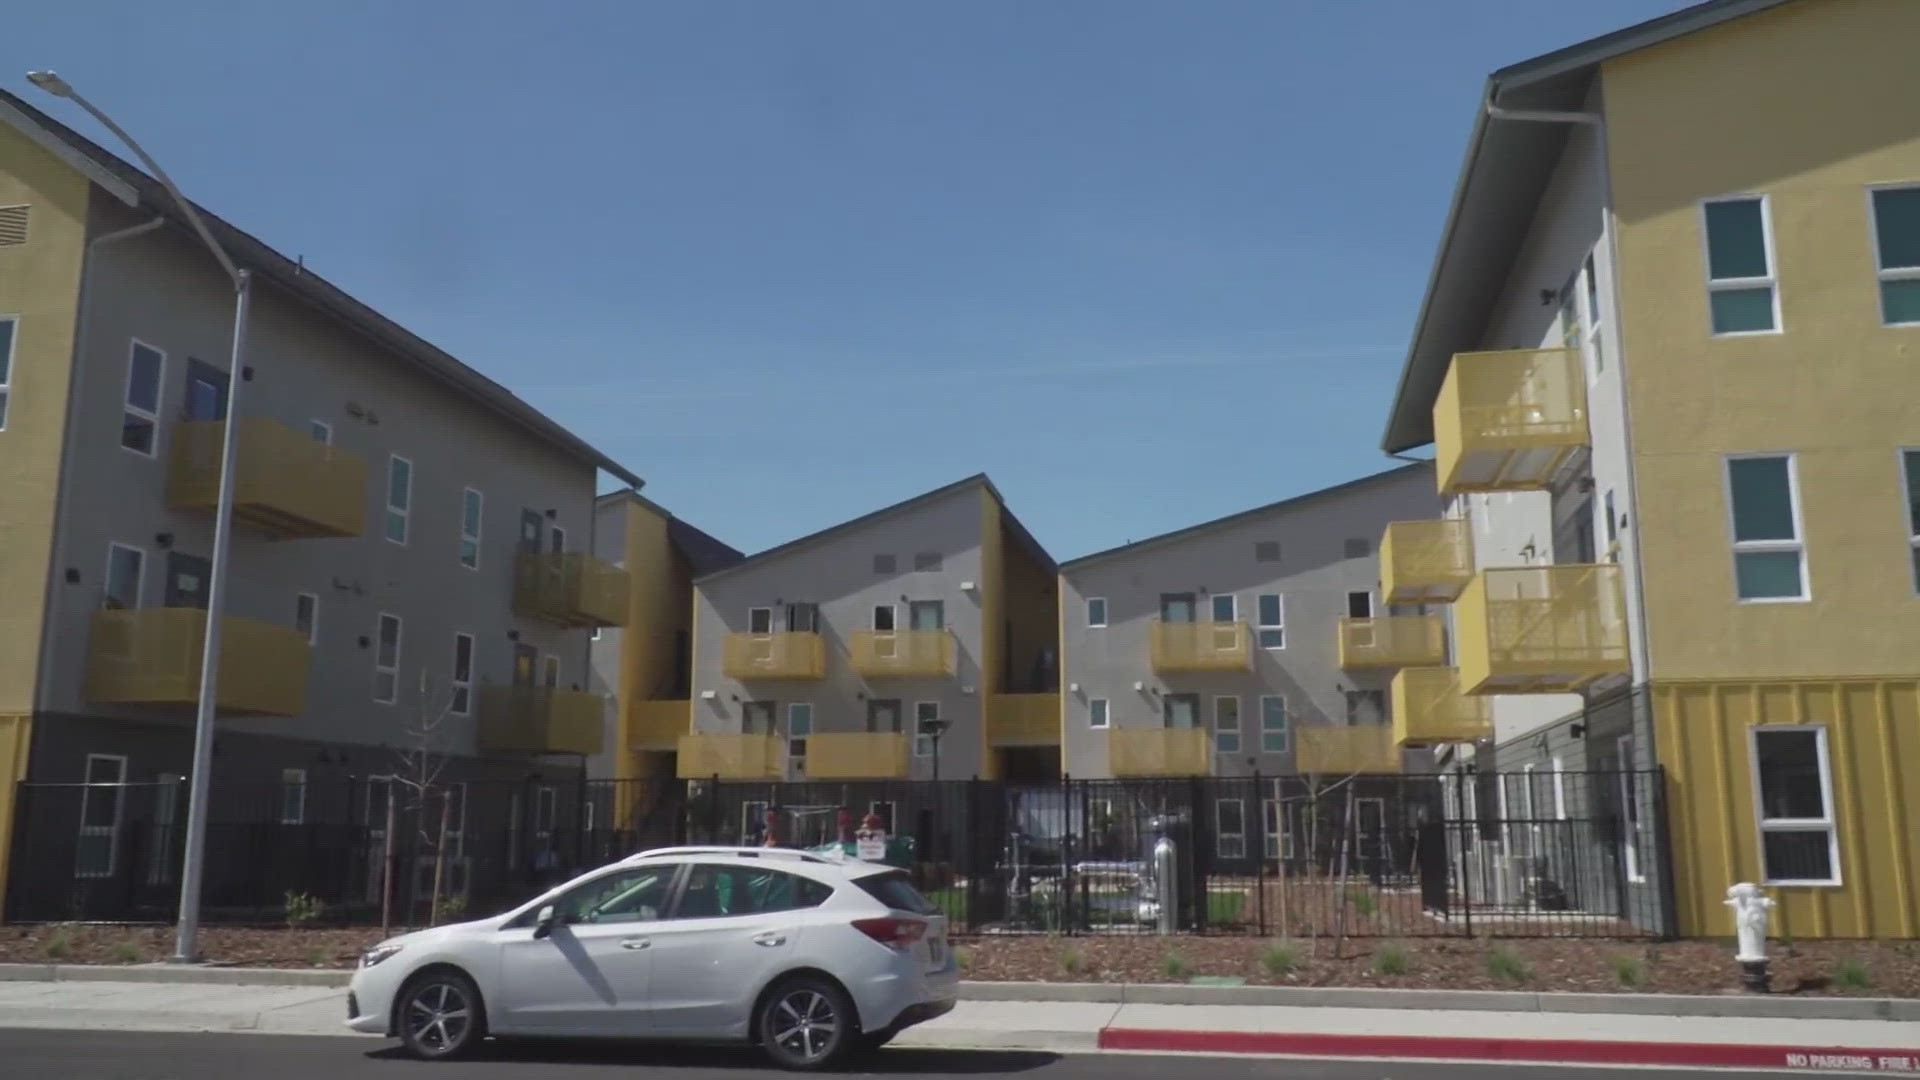 New affordable housing community to open in South Sacramento